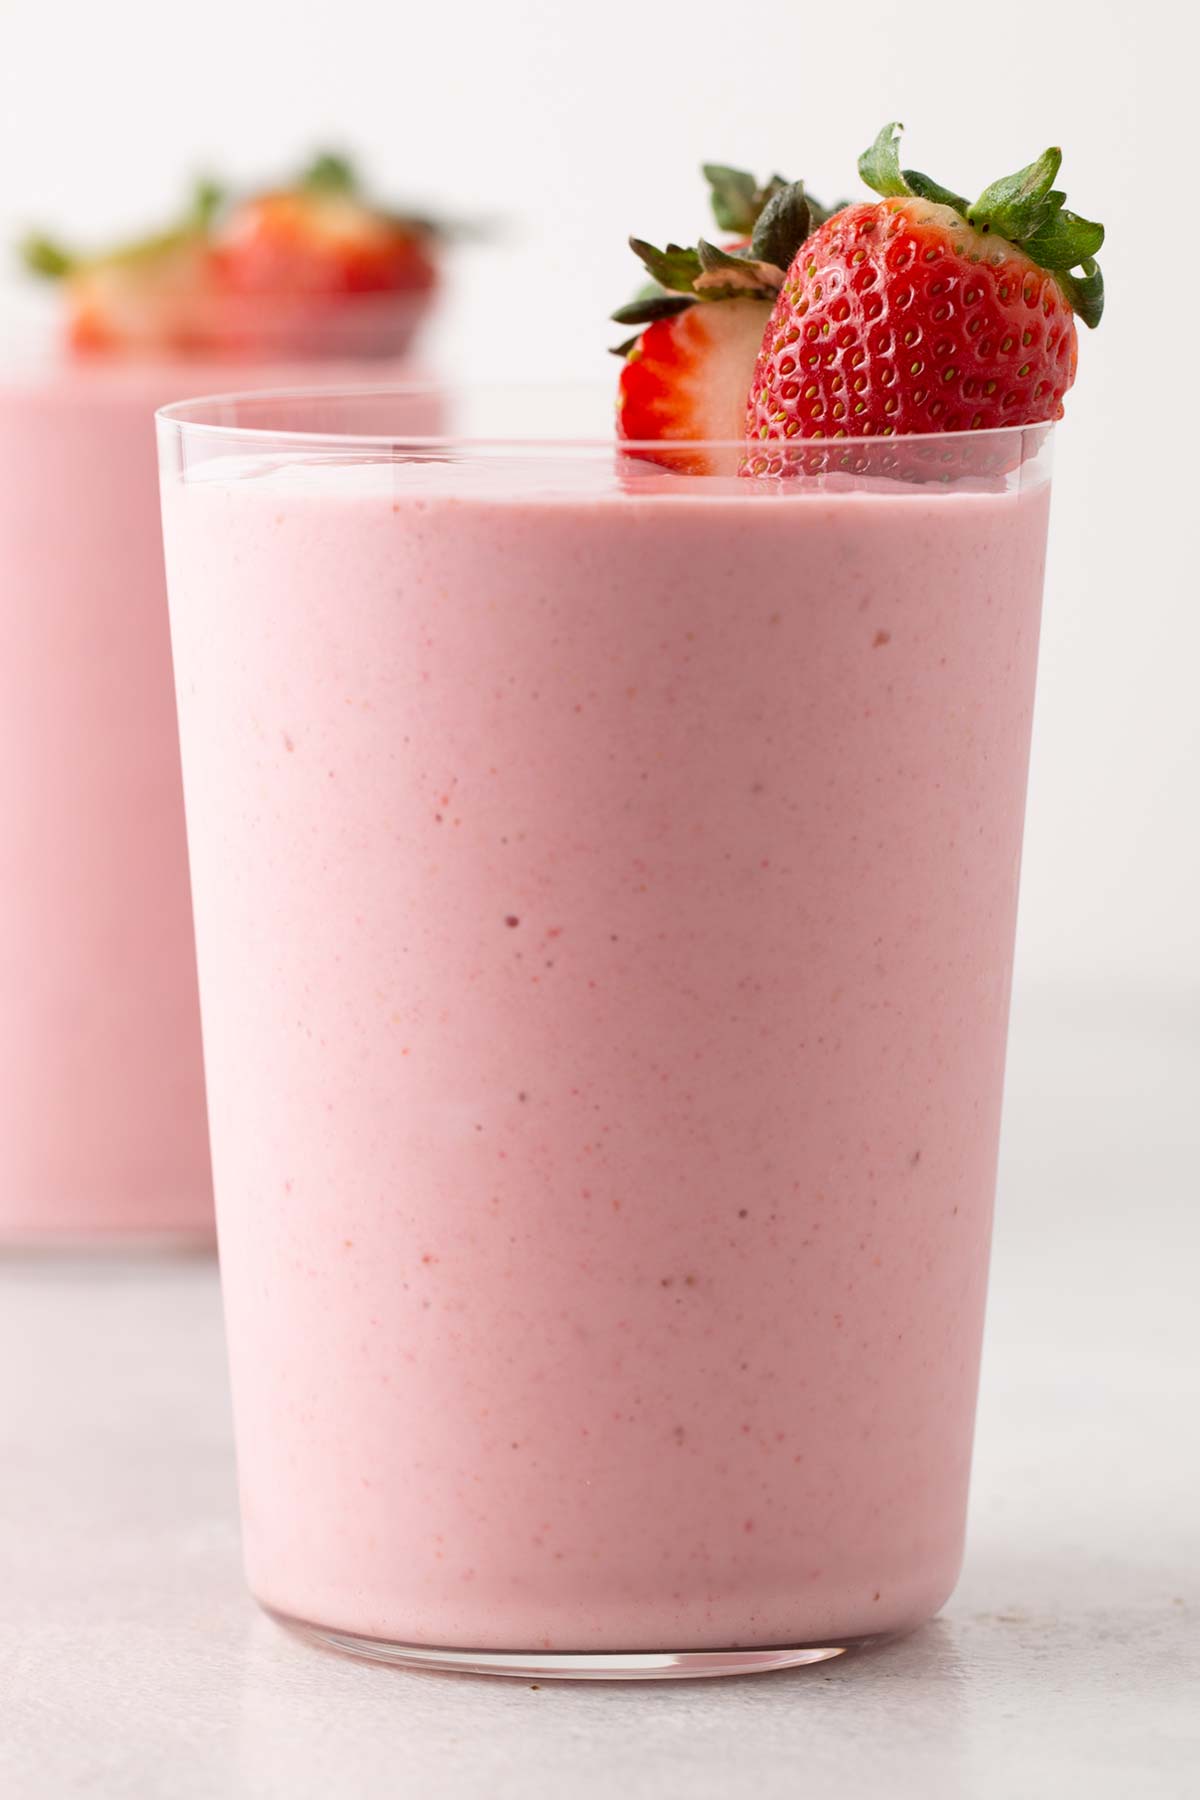 Strawberry smoothie in a glass cup.